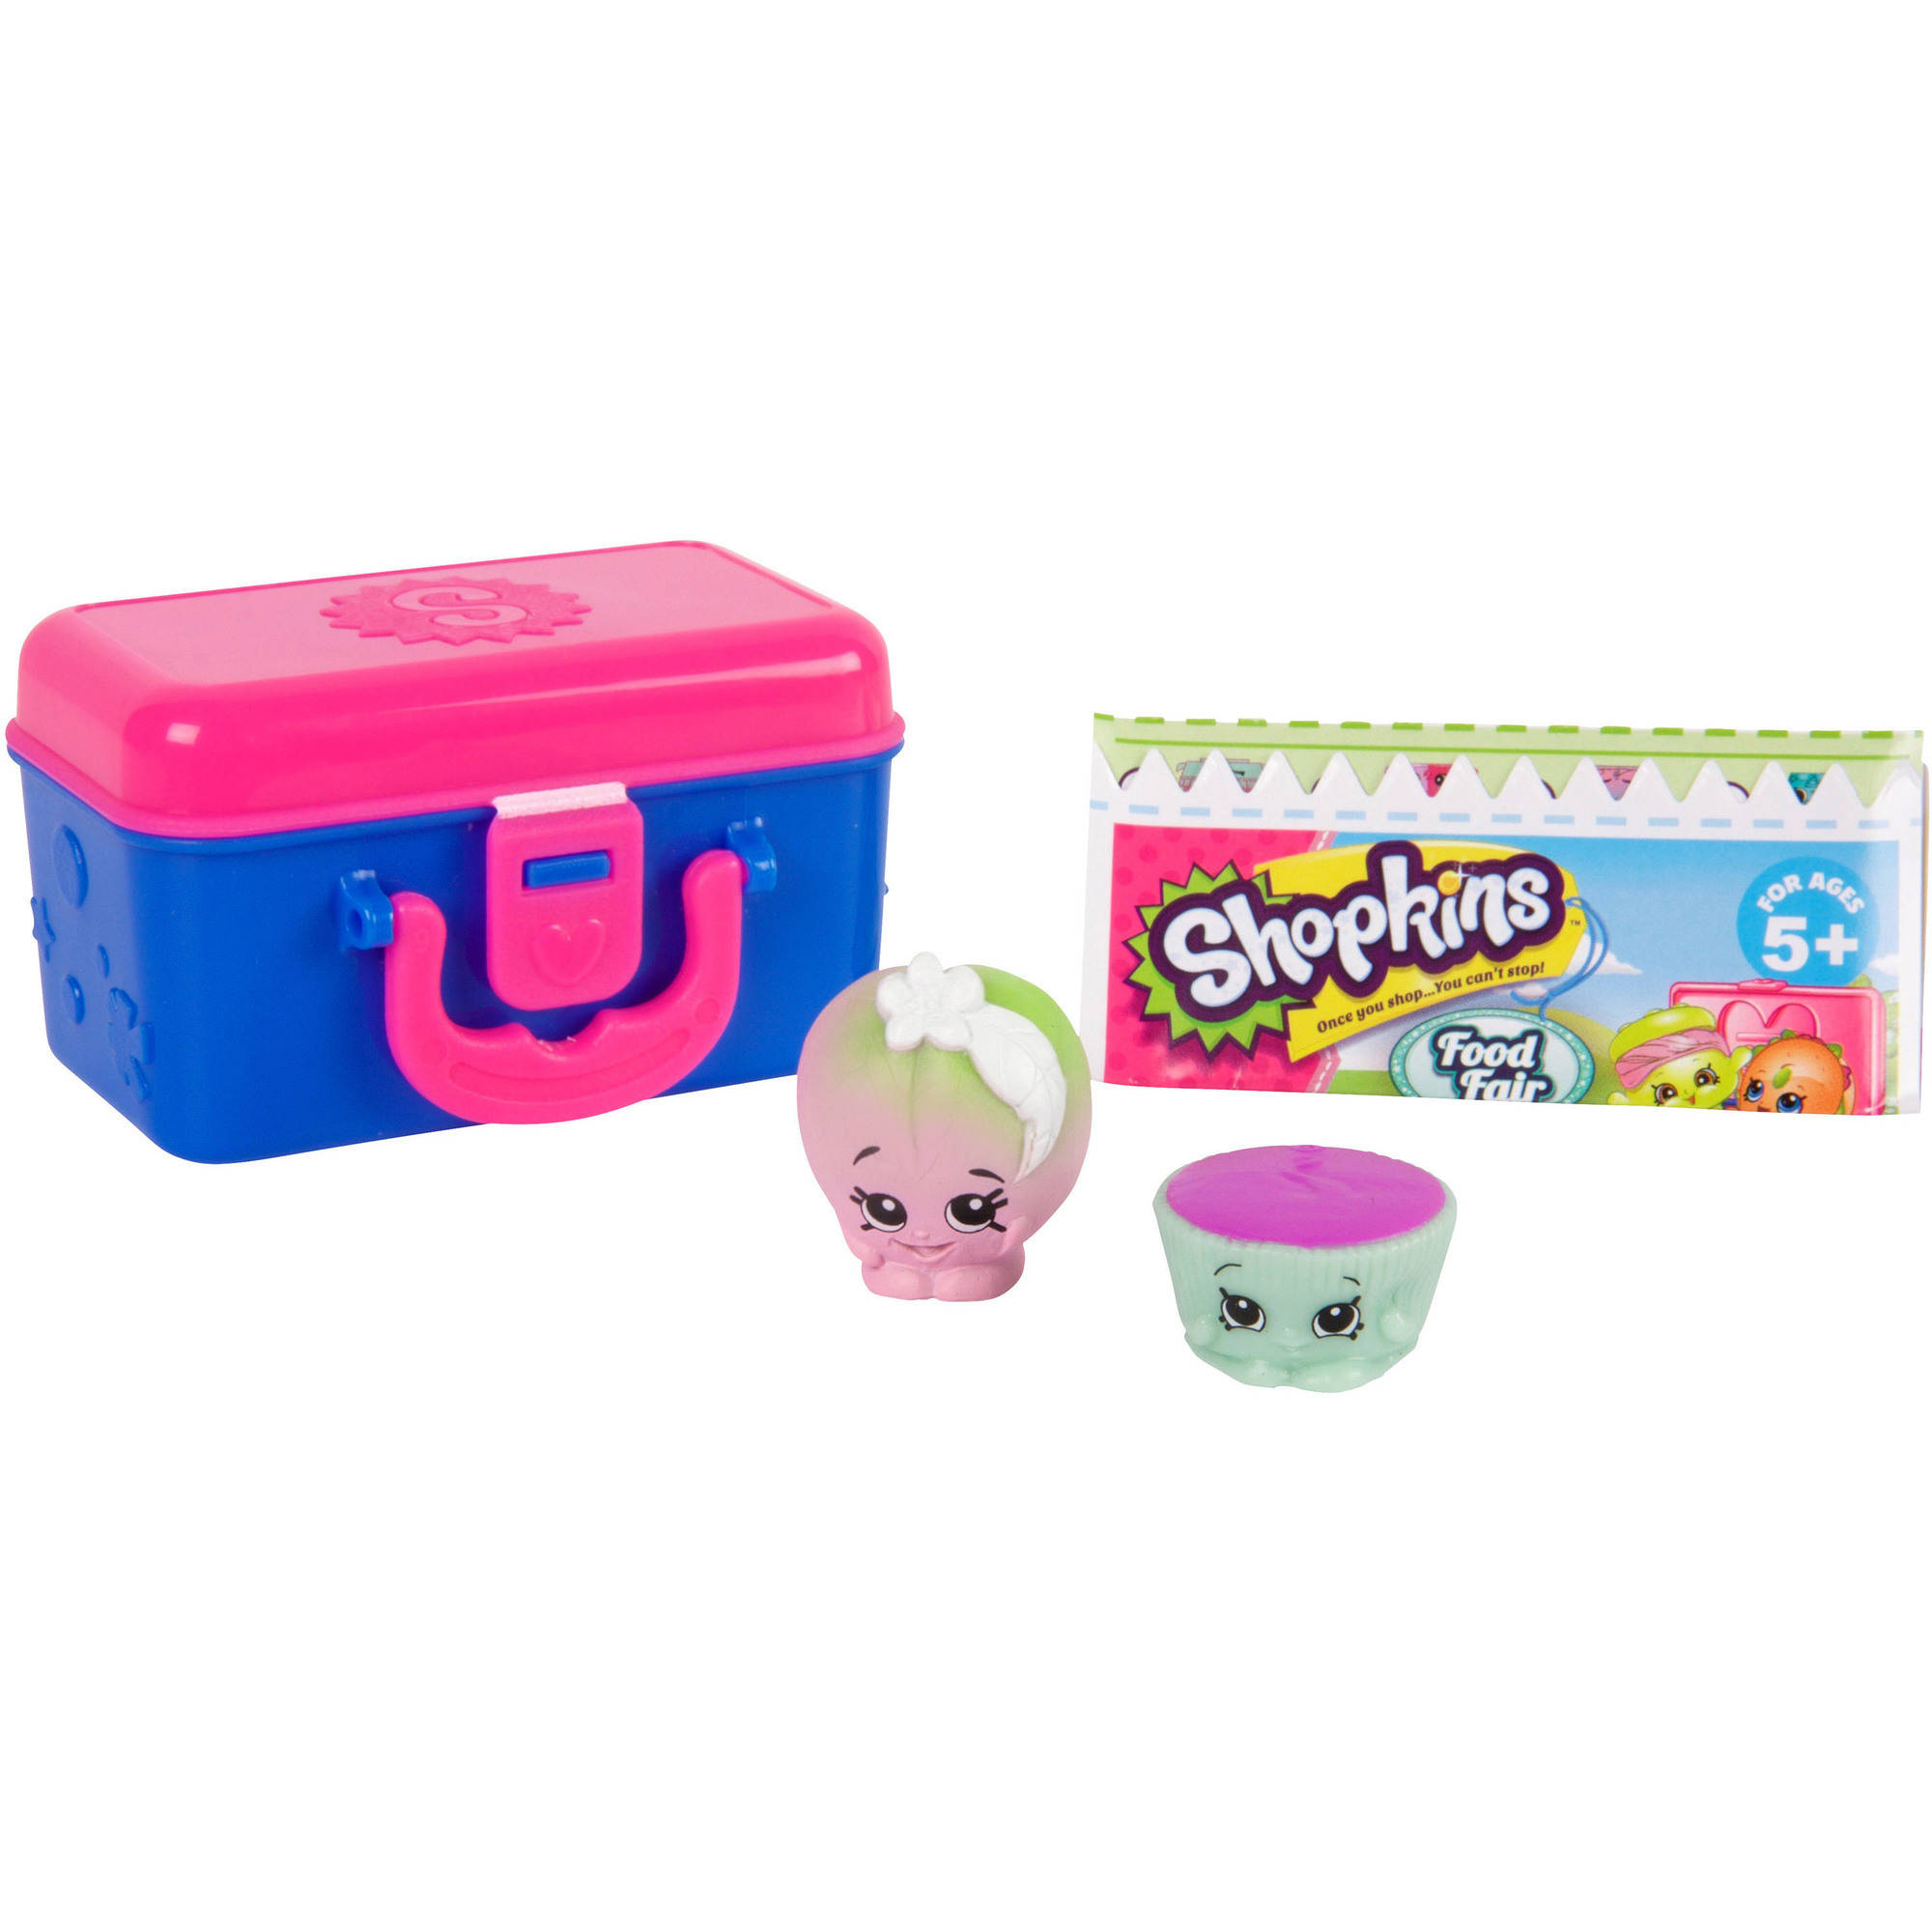 Shopkins Season 7 Walmart Exclusive Food 2-Pack of Shopkins + 1 Lunch Box Container - image 1 of 6